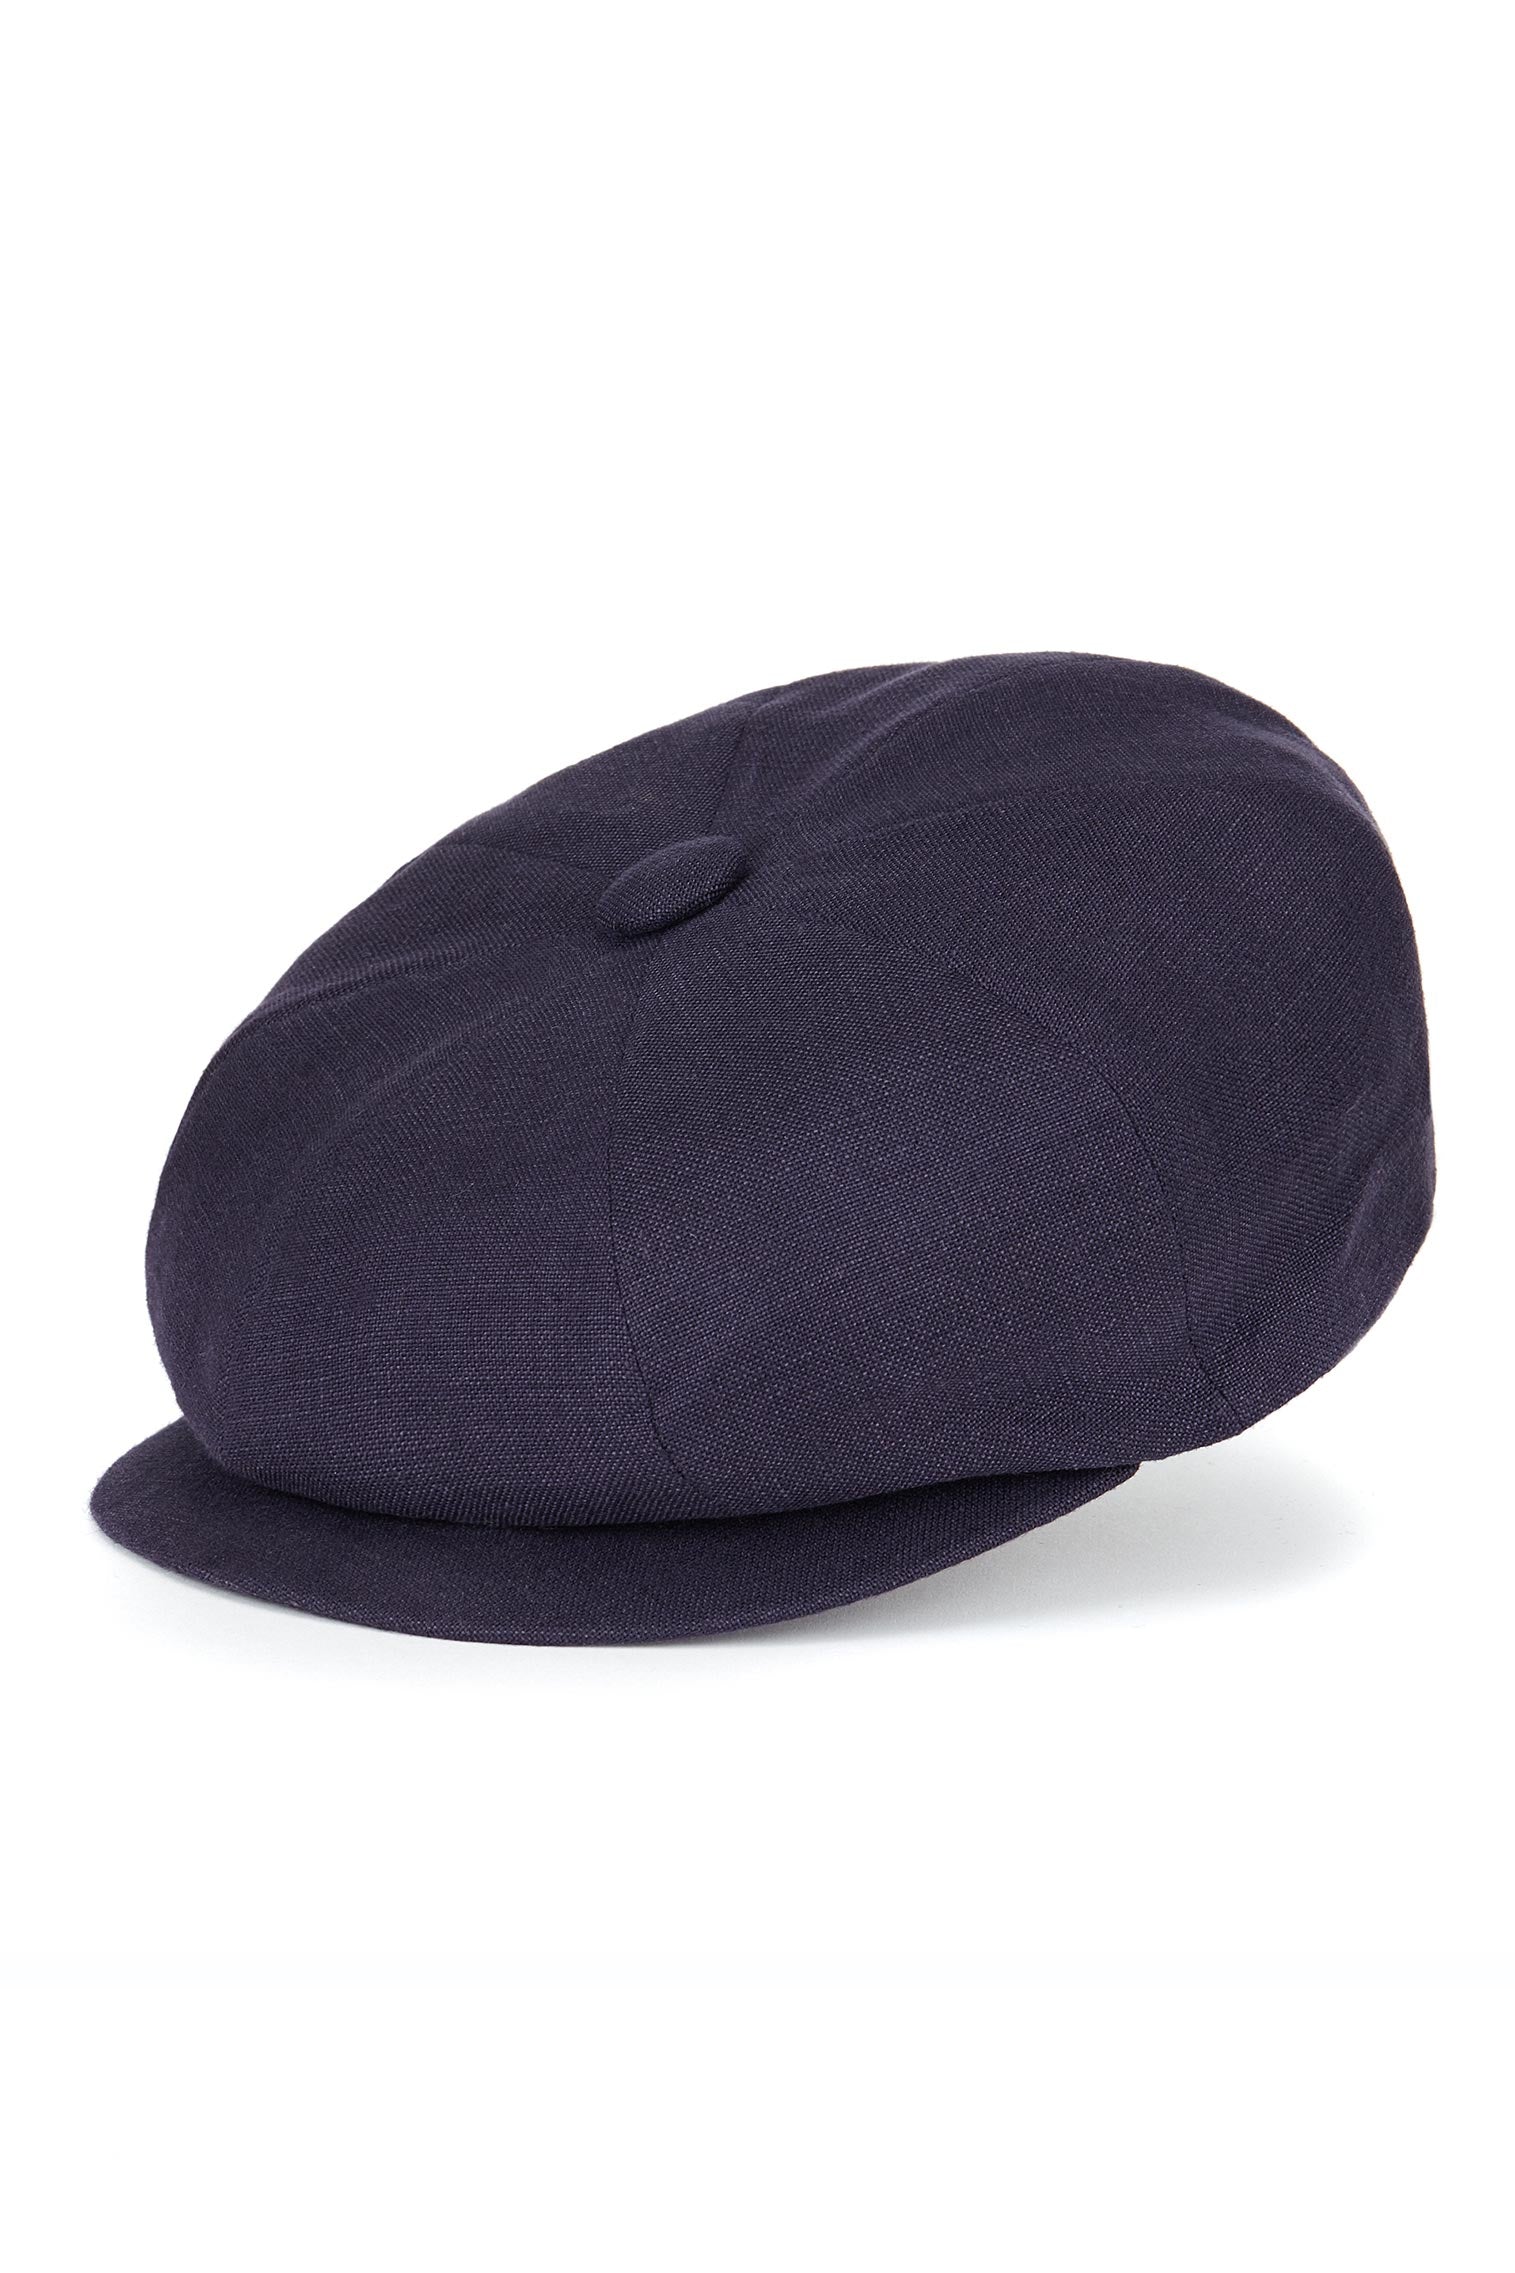 Navy Linen Muirfield Bakerboy Cap - Hats for Square Face Shapes - Lock & Co. Hatters London UK